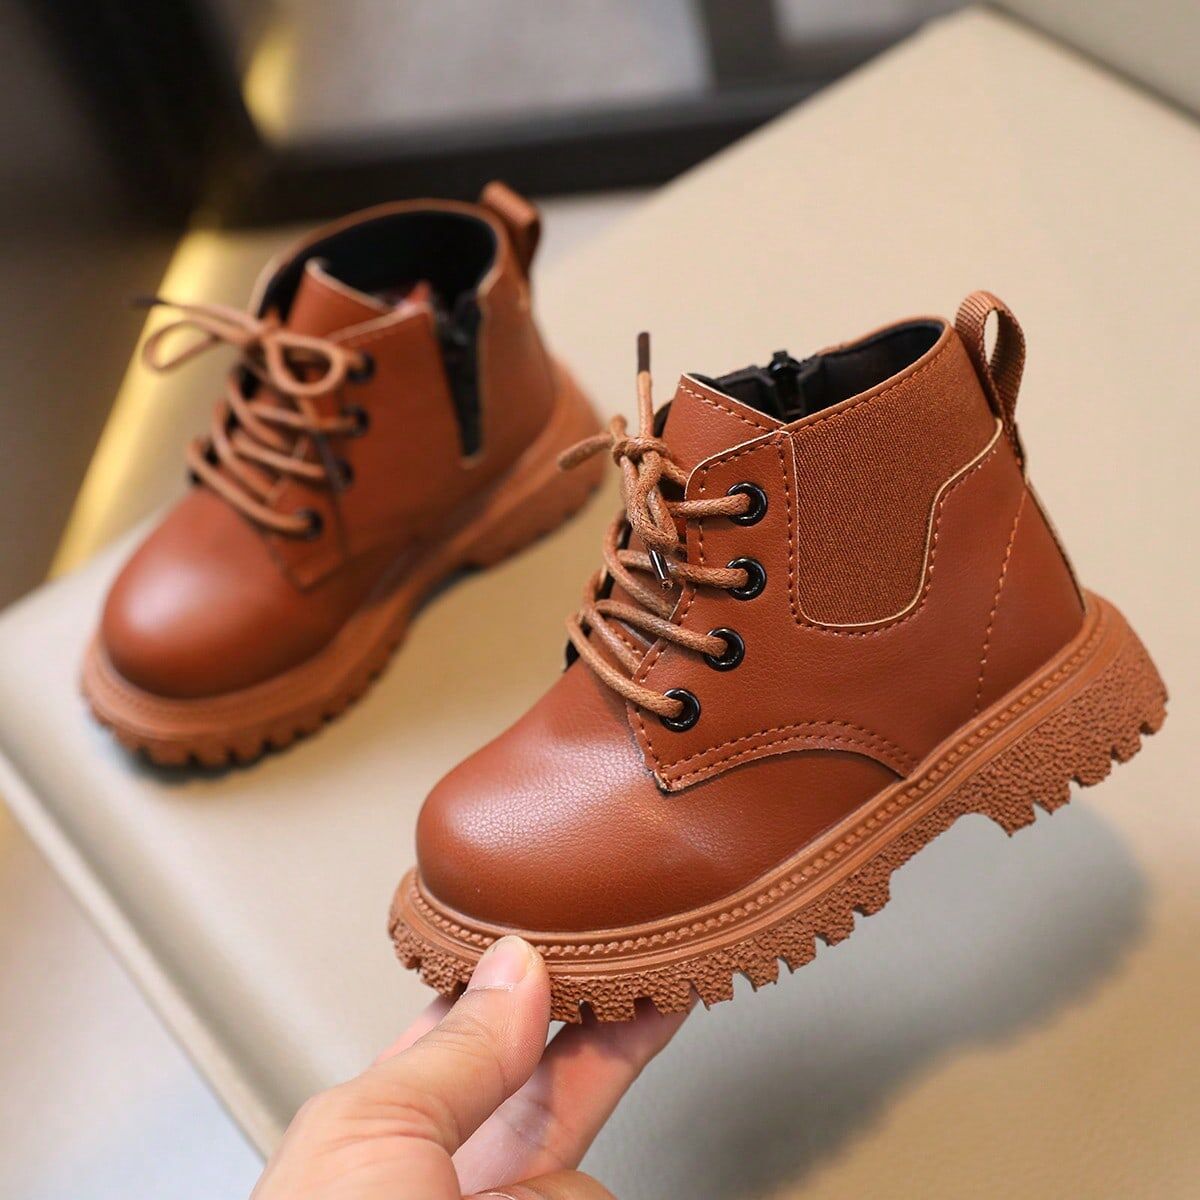 SHEIN Children's Fashionable Lace-up Boots, Comfortable Outdoor All-match Shoes Bronze CN21,CN22,CN23,CN24,CN25,CN26,CN27,CN28,CN29,CN30